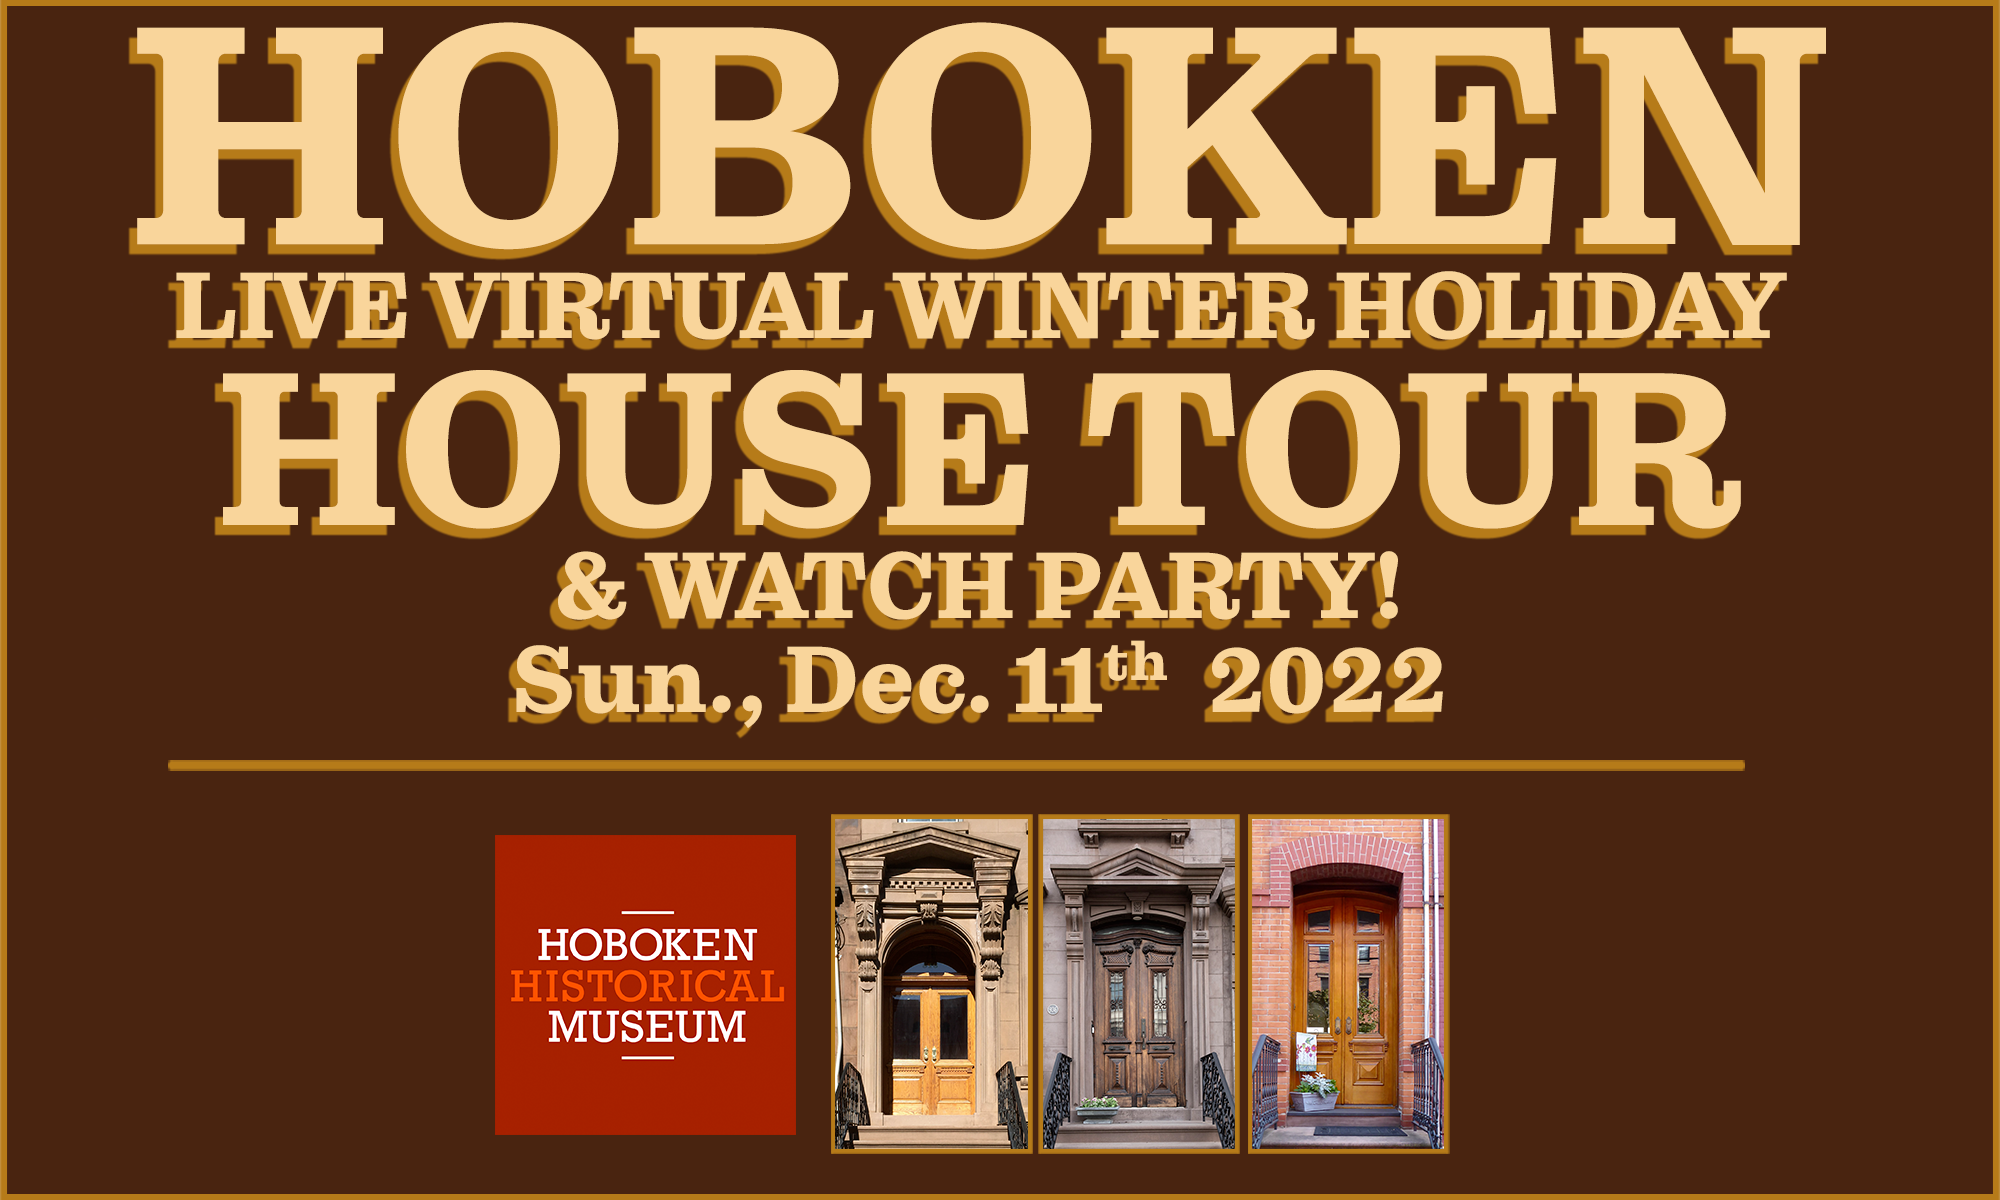 Hoboken Live Virtual winter Holiday House Tour & Watch Party; Sunday Dec. 11th 2022